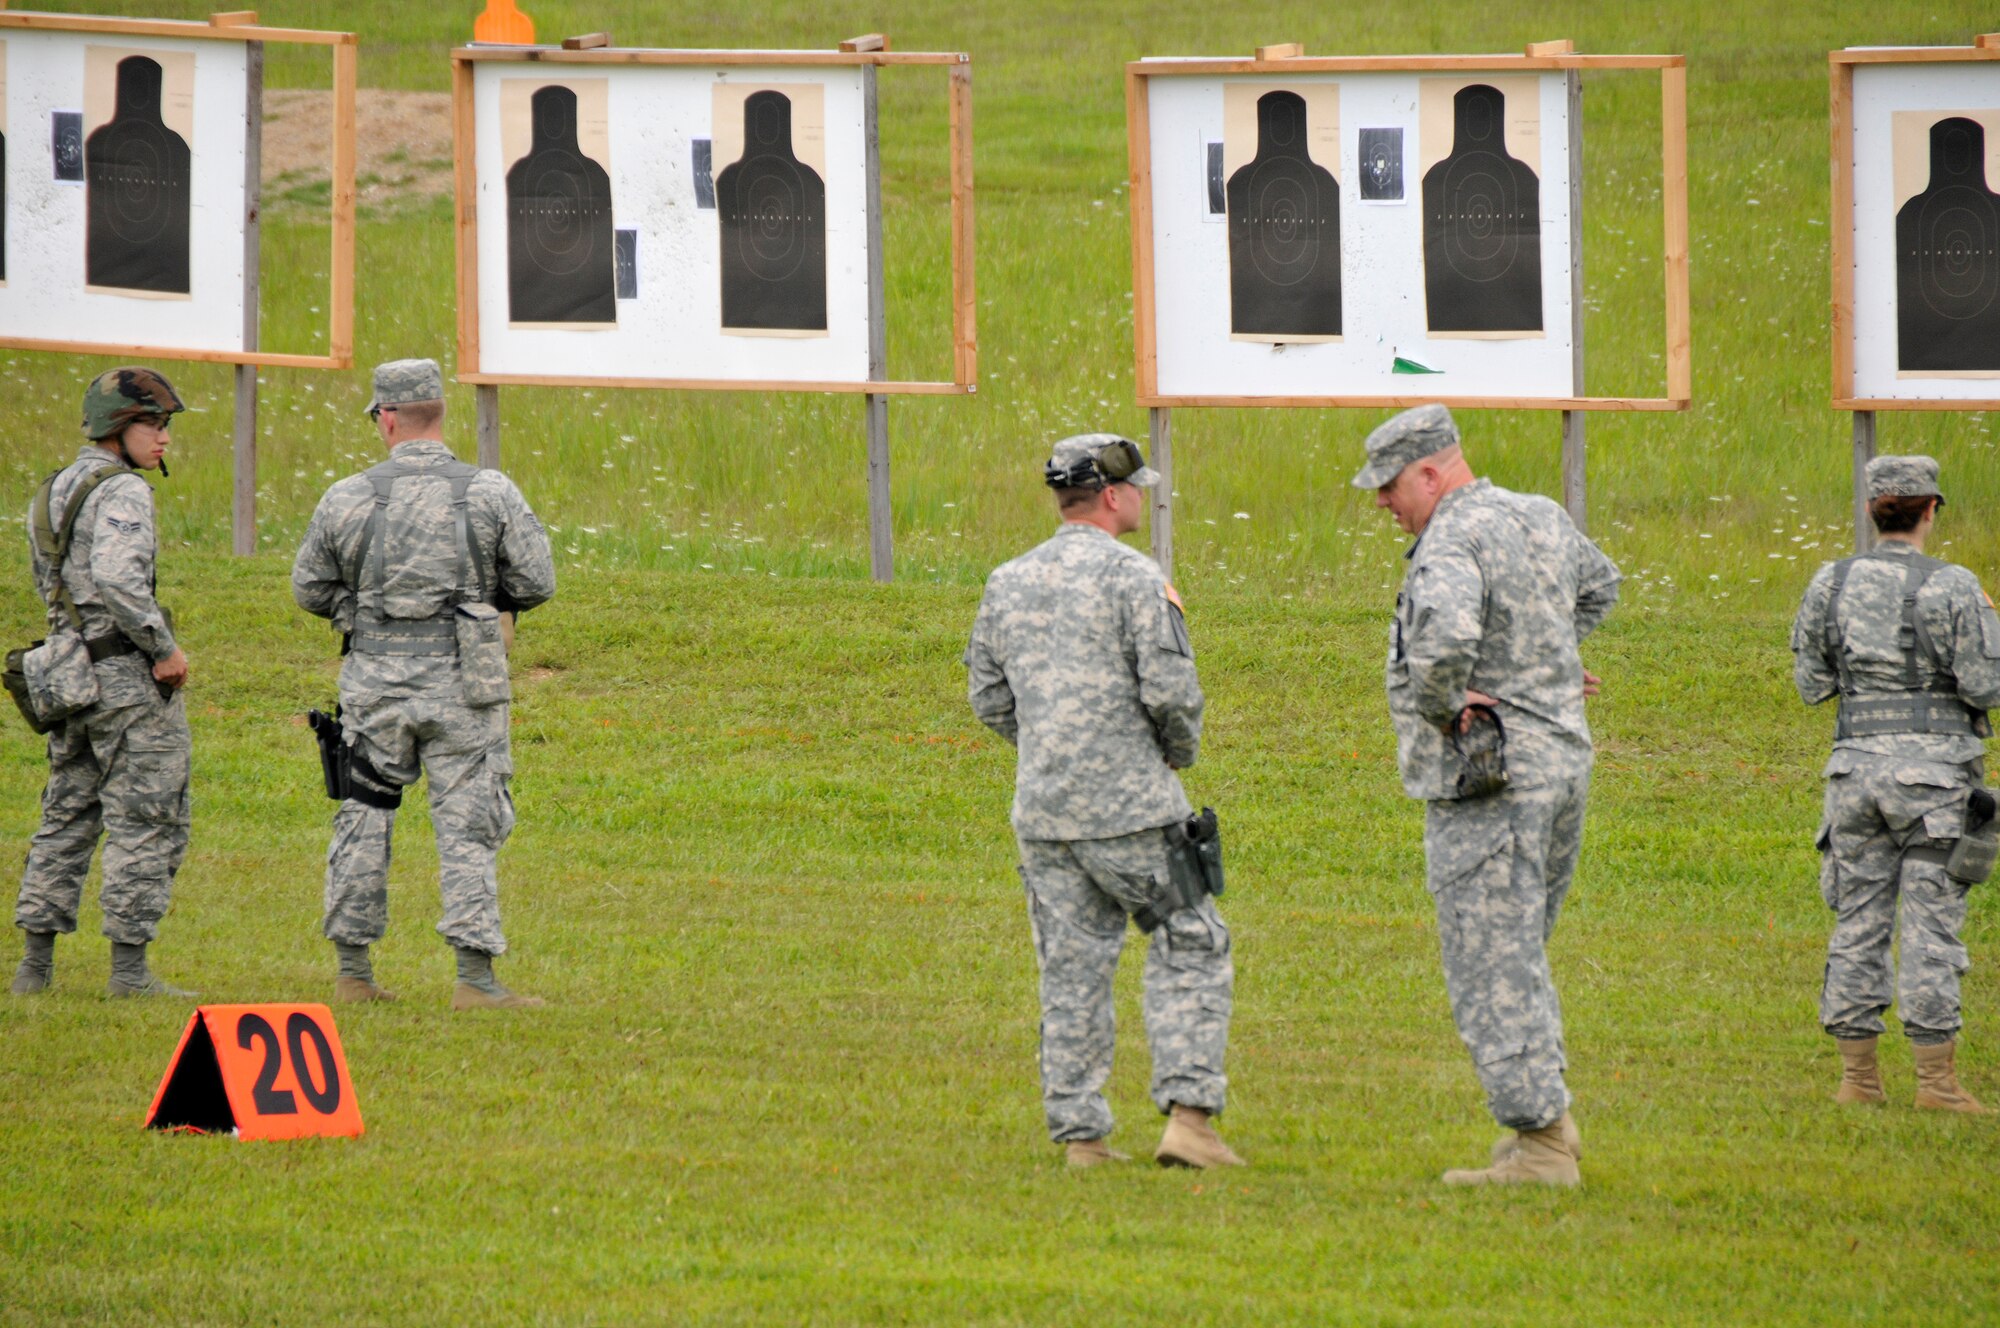 Maj. Gen. Max Haston, Tennessee Adjutant General, walks the range with Capt Timothy Butler, Range Operations Specialist, during a training session at the 2014 Tennessee Adjutant General Marksmanship Pistol Match in Tullahoma, TN on Aug 16. The Tennesee TAG Match is held anually to promote marksmanship skills in the Army and Air National Guard.  (U.S. Air National Guard photo by Master Sgt. Kendra M. Owenby, 134 ARW Public Affairs)